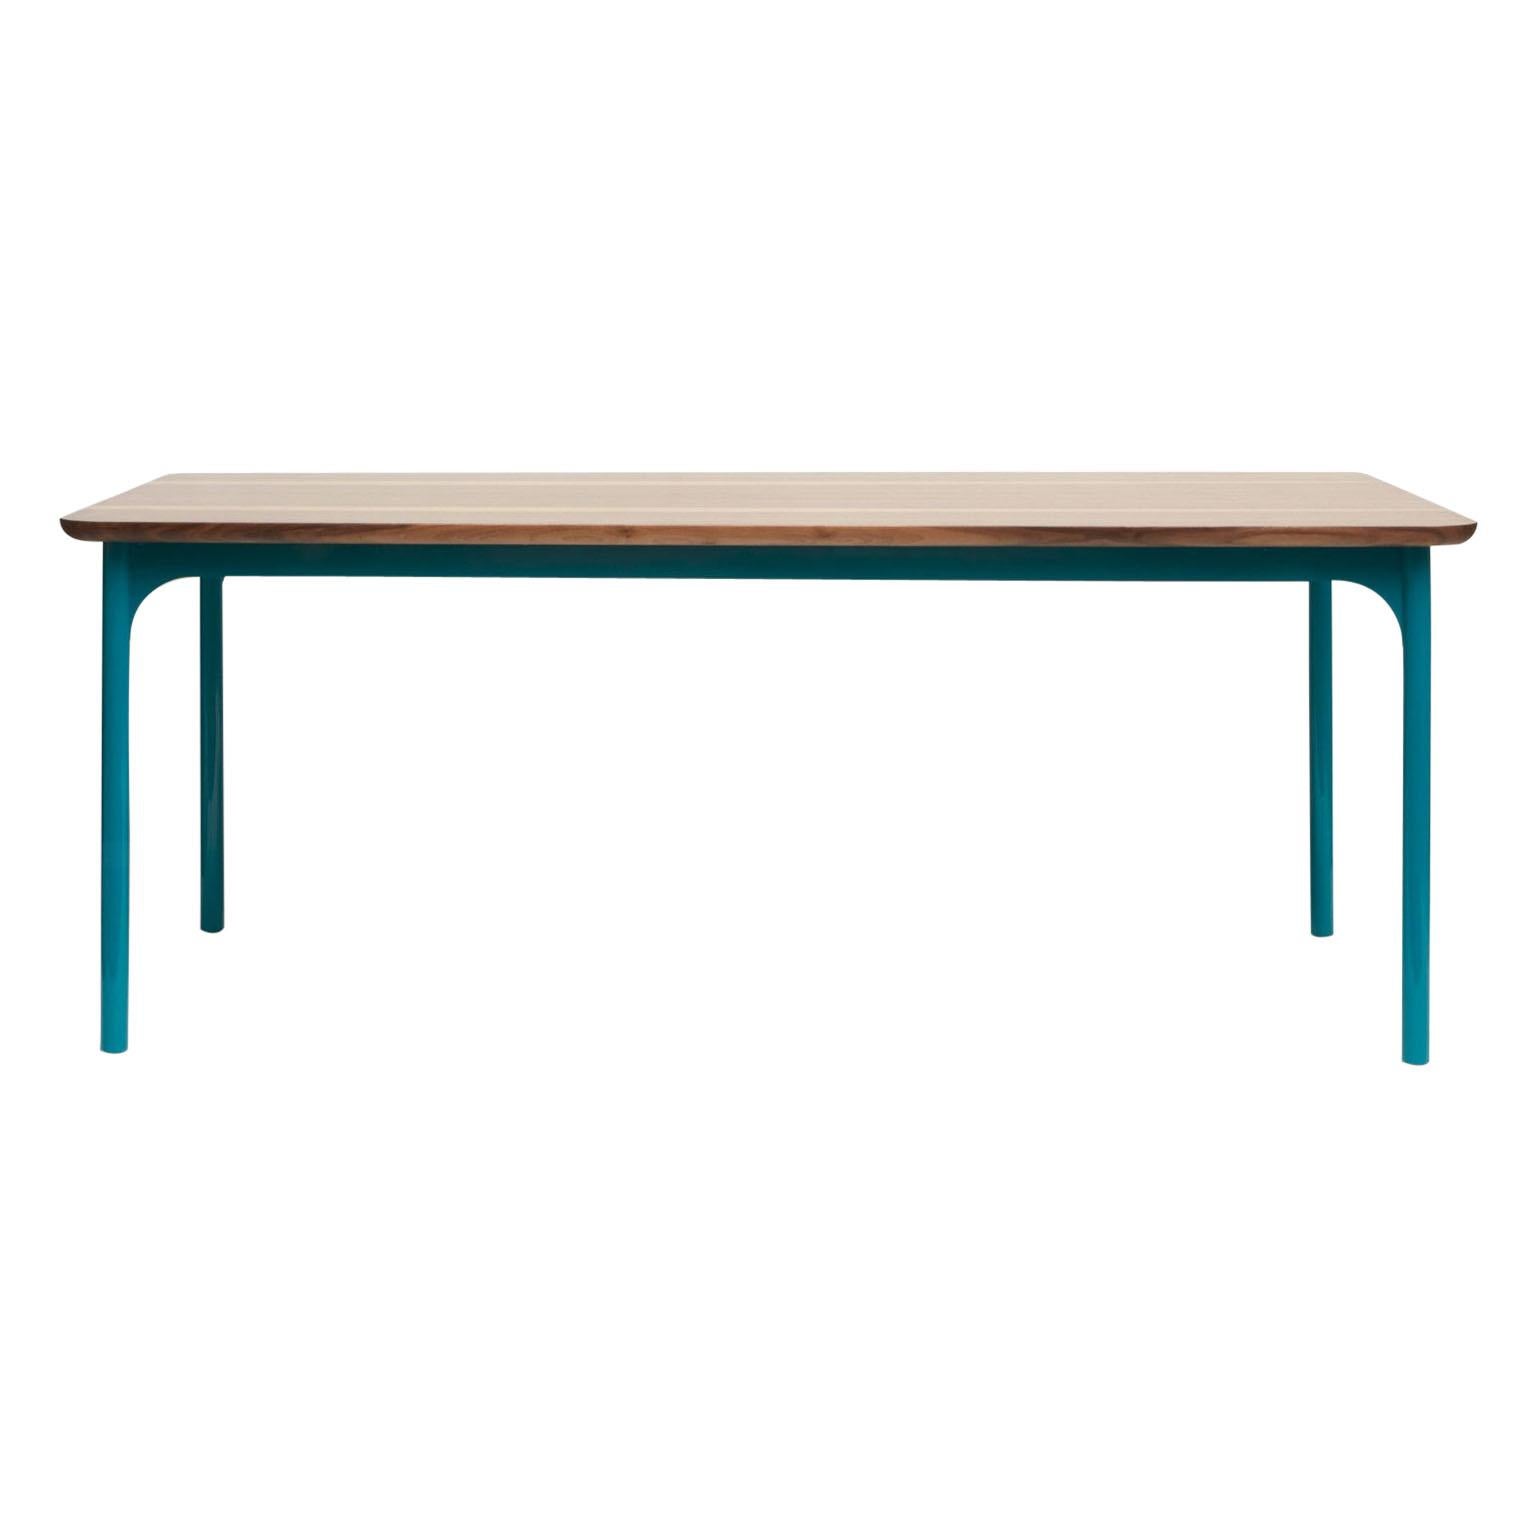 21st Century Matteo Zorzenoni Dining Table Metal Structure Wood Fillet S Scapin For Sale